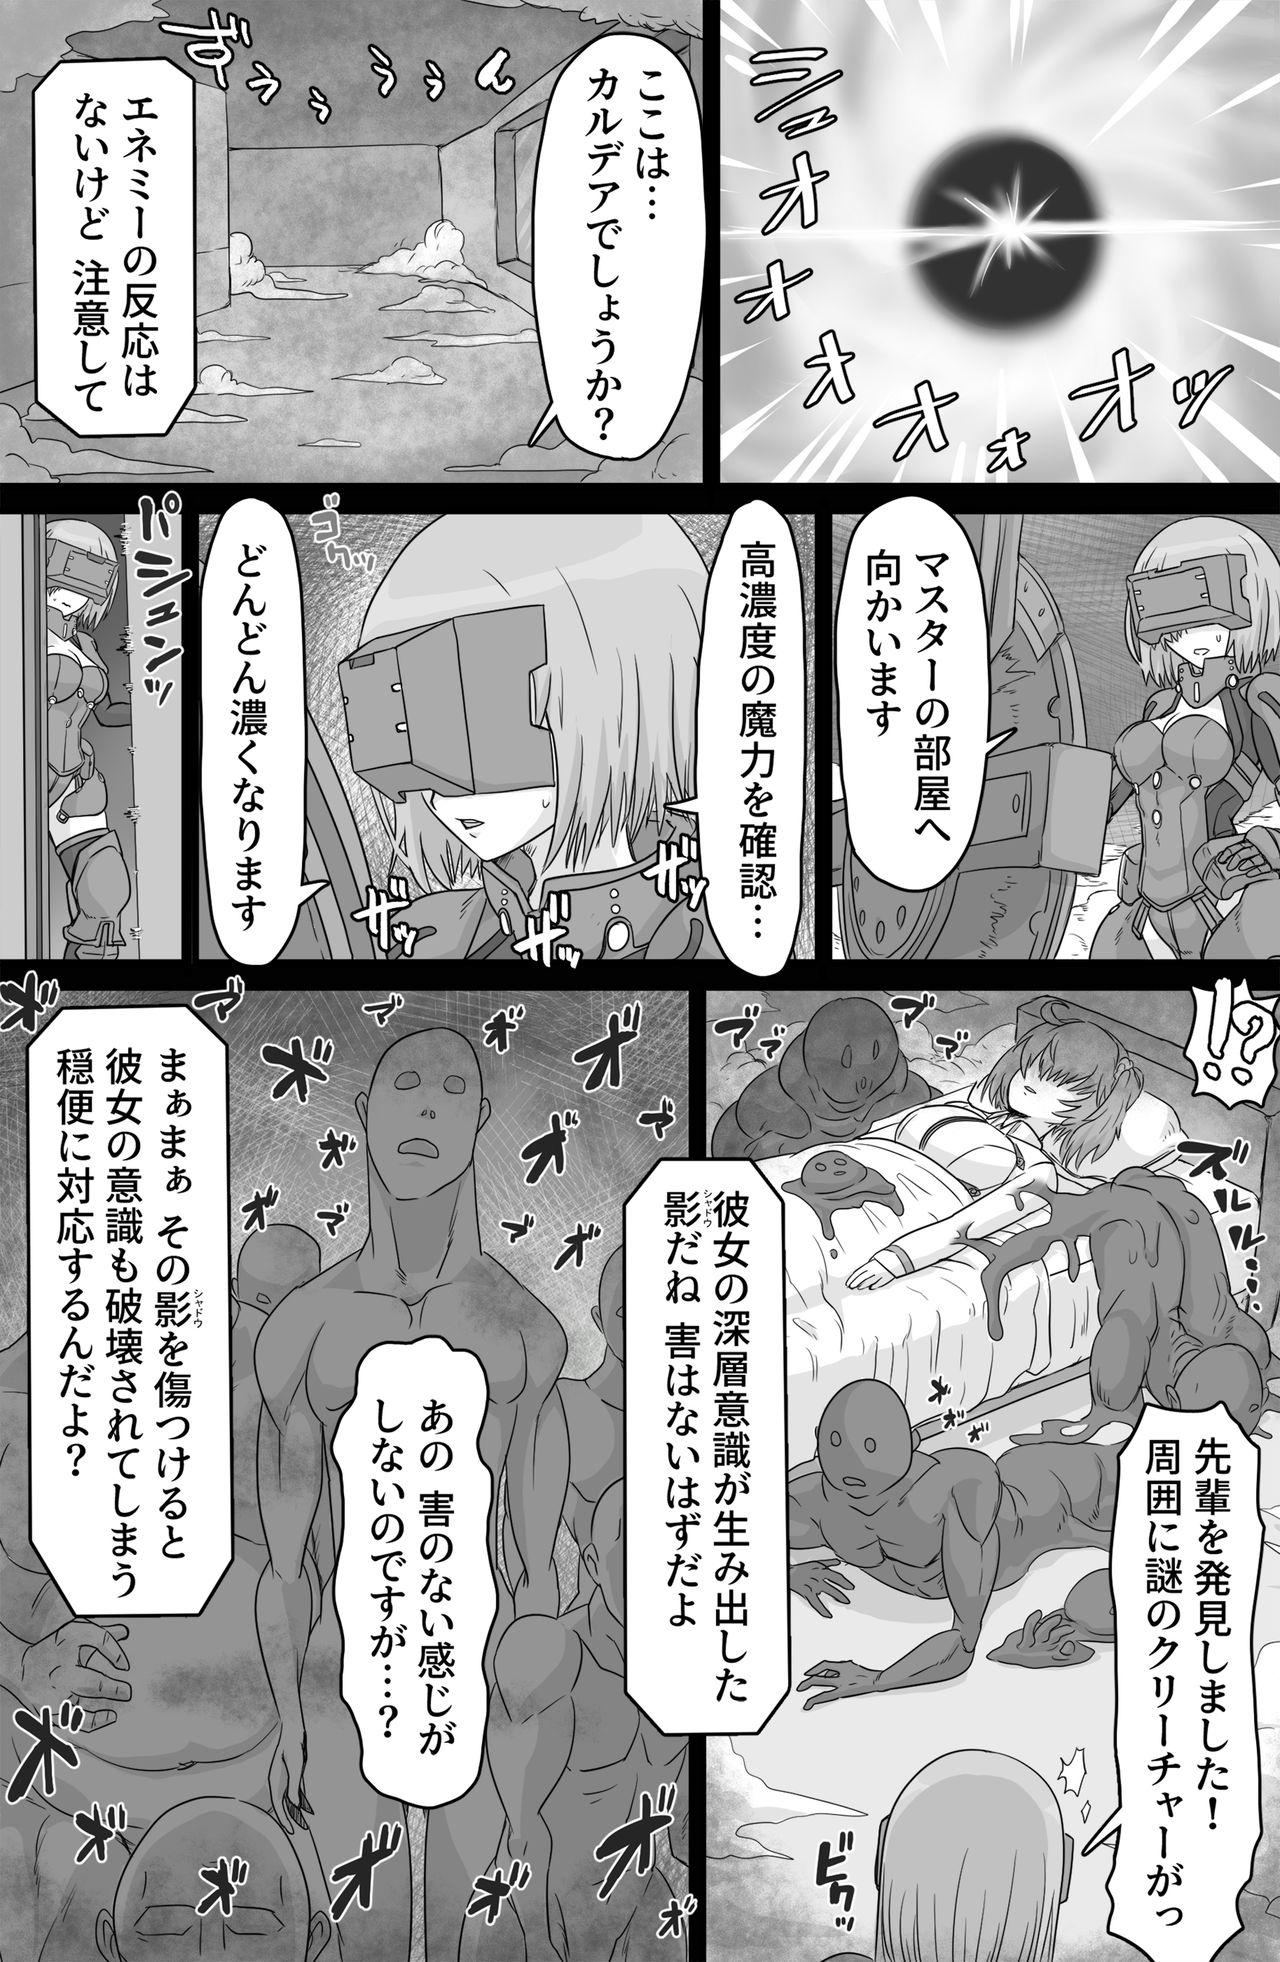 Dorm Shadow Bind - Fate grand order Amateurs - Page 3